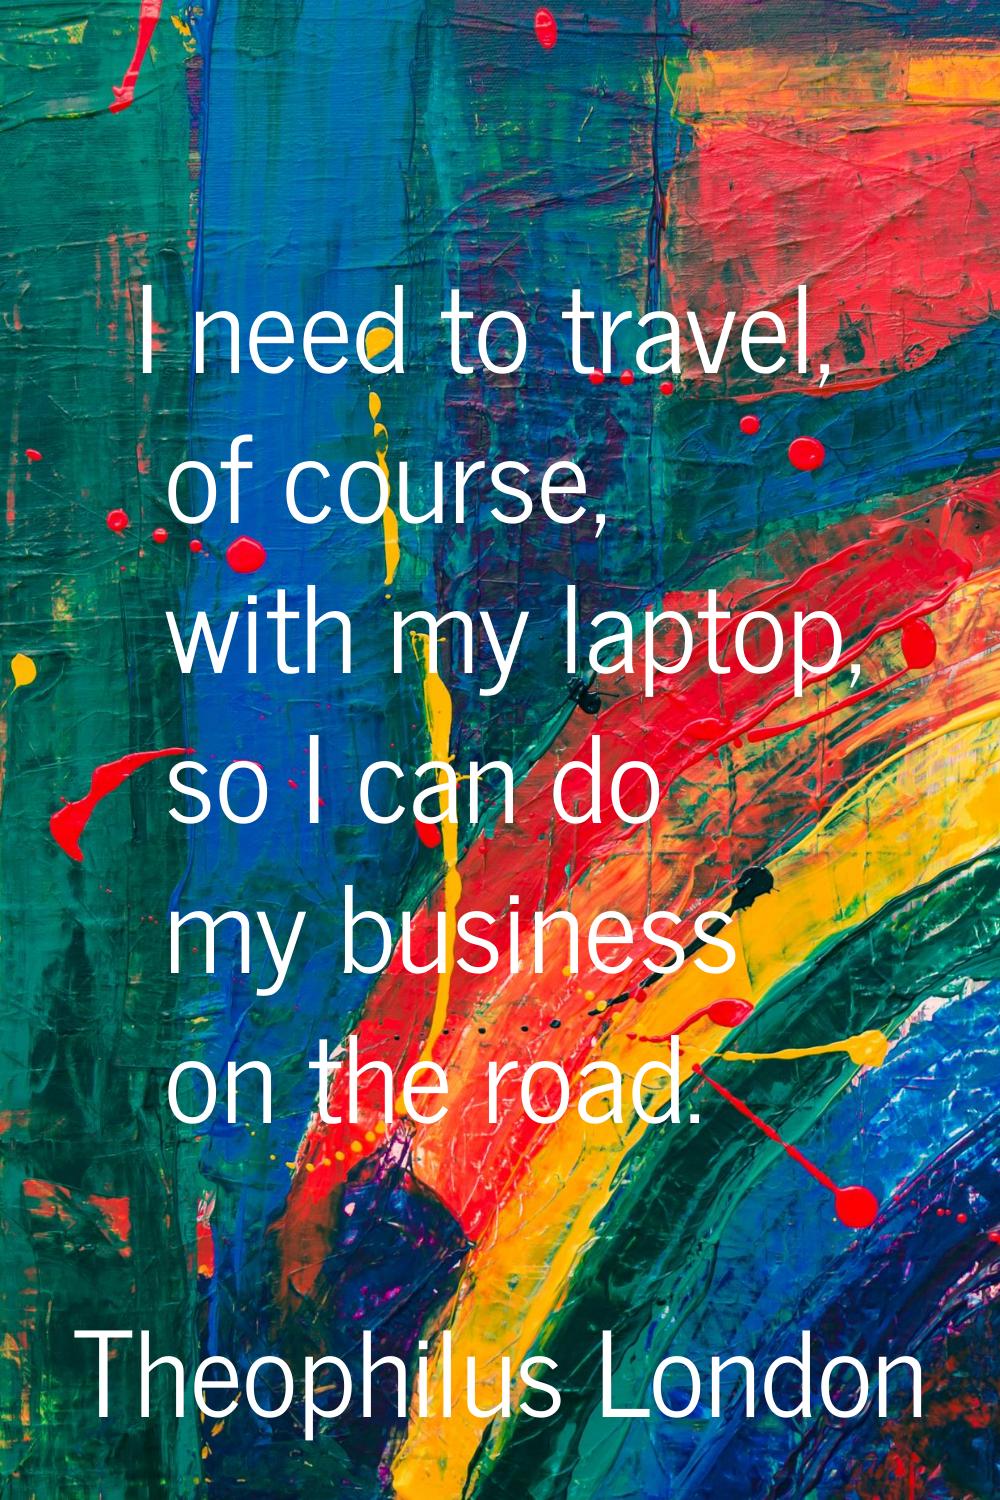 I need to travel, of course, with my laptop, so I can do my business on the road.